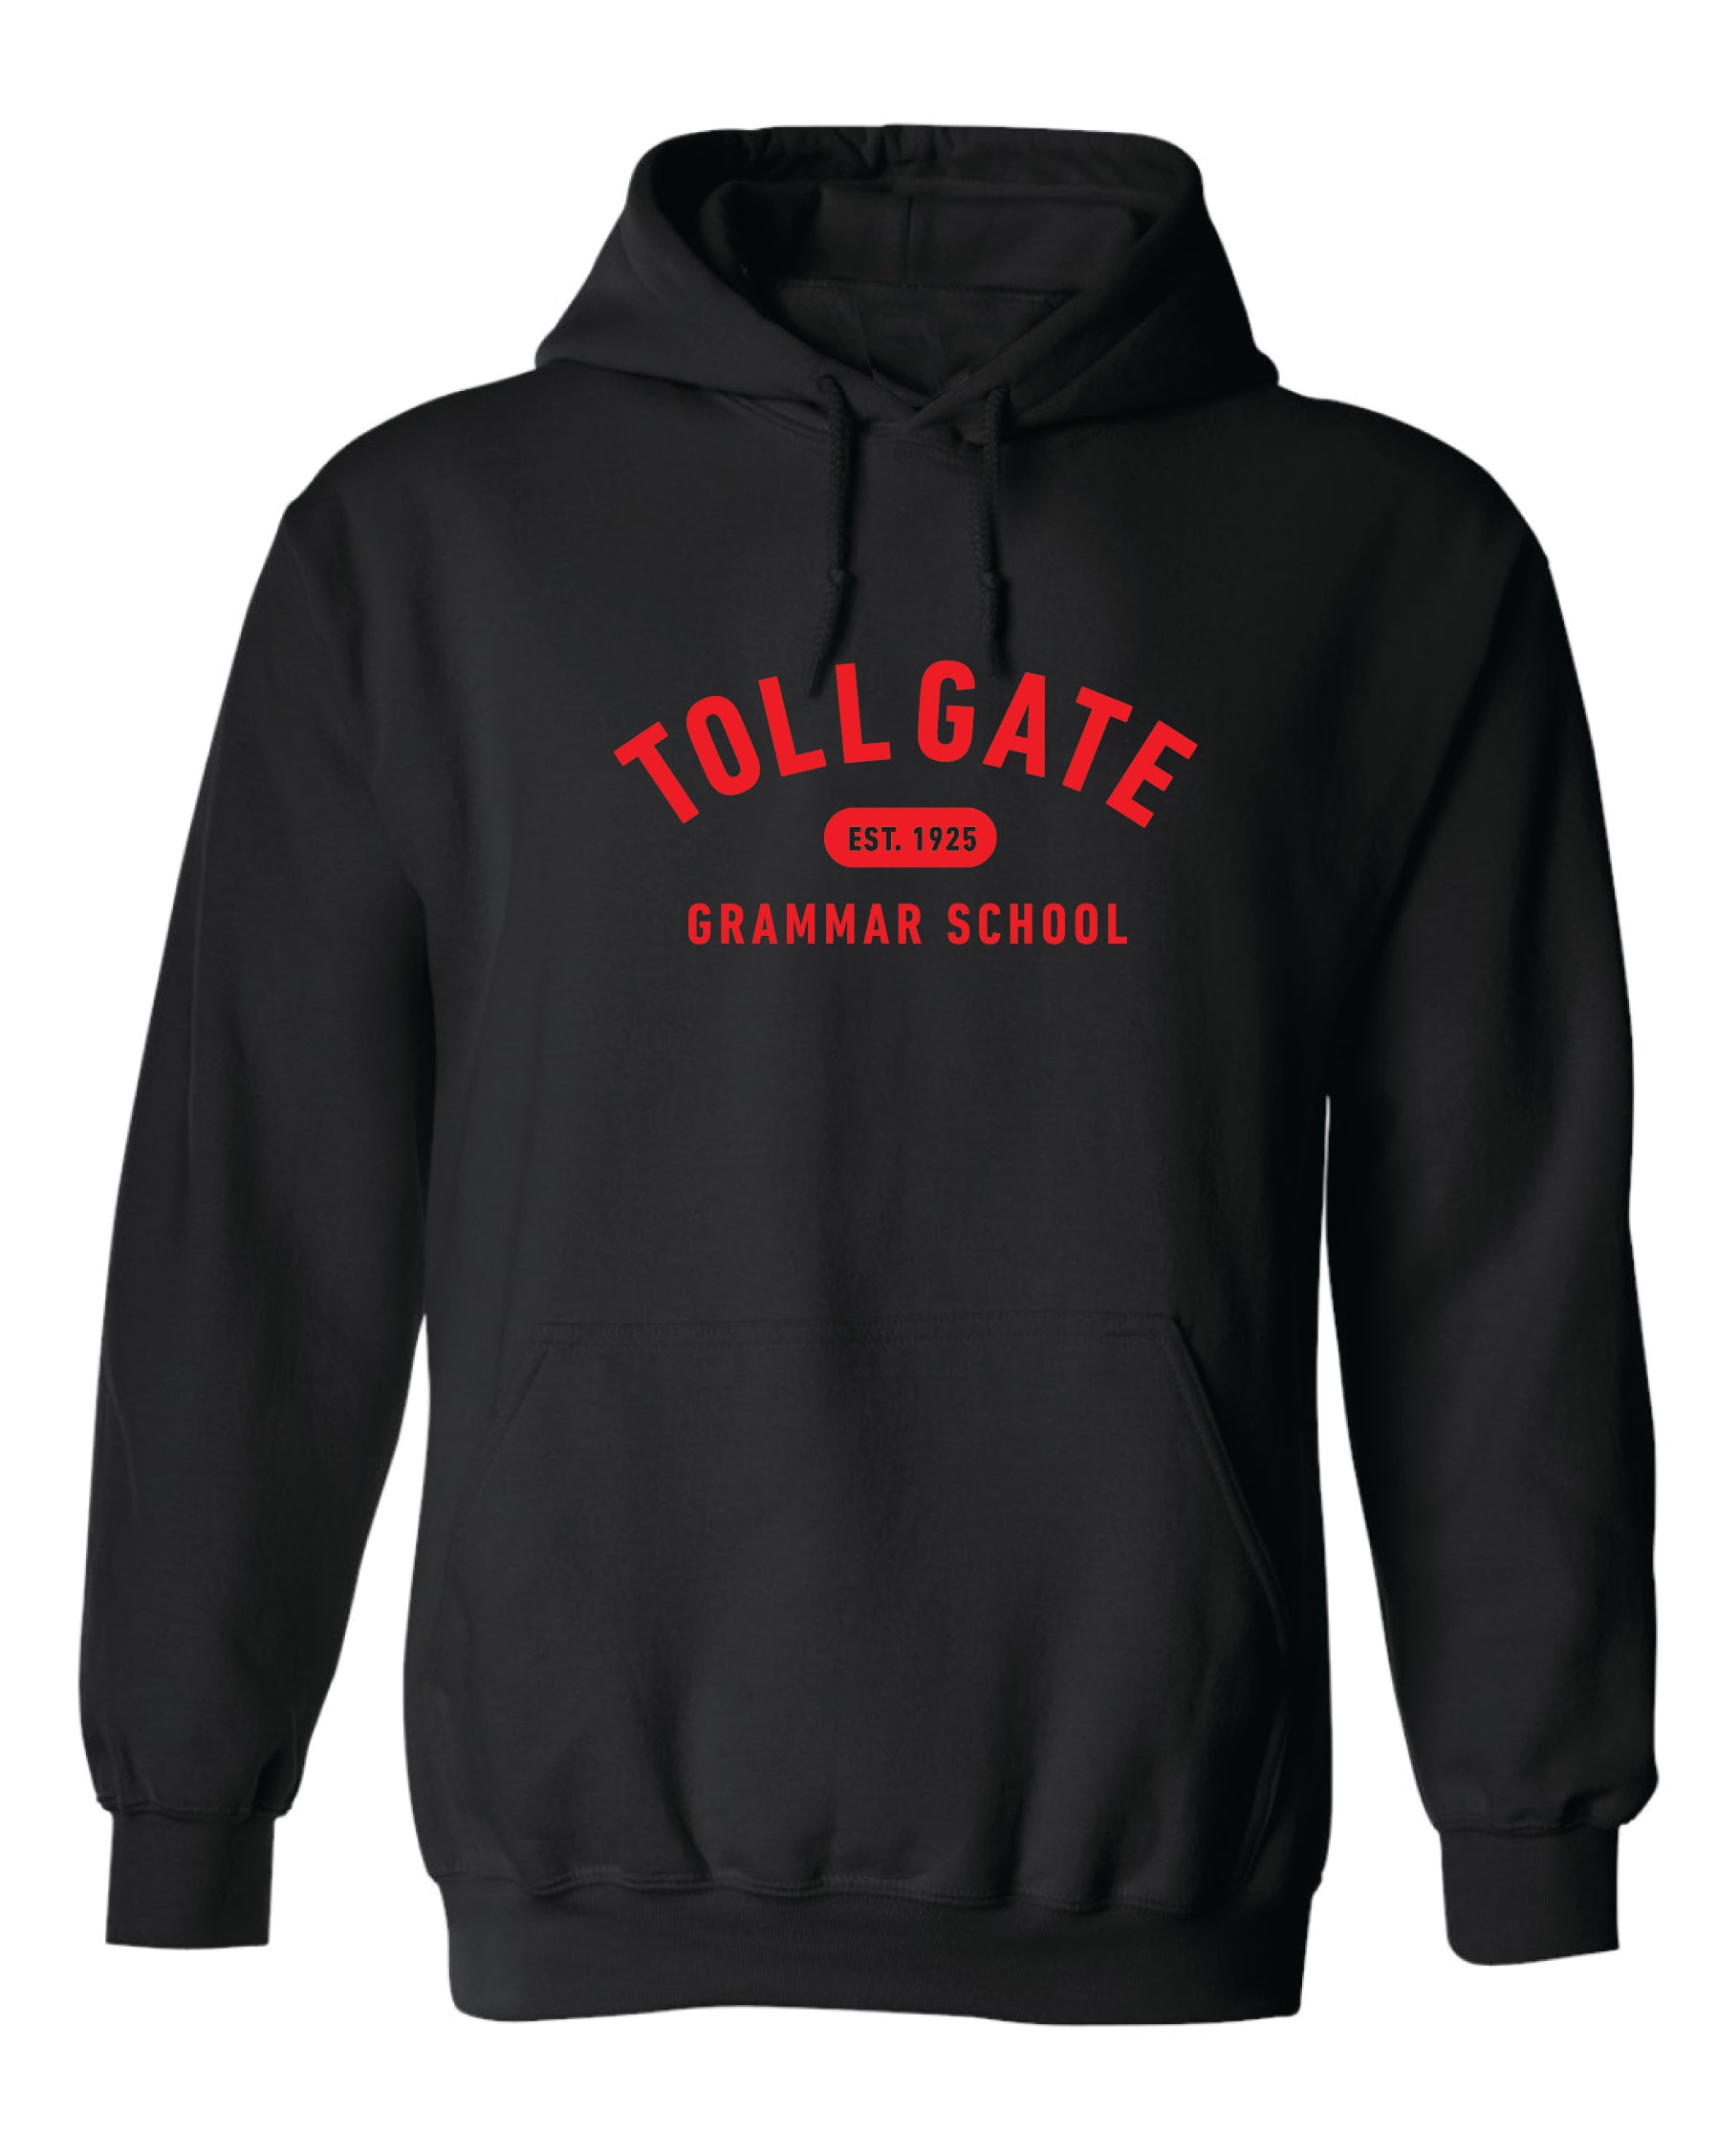 Toll Gate Black Hoodie - Adult Unisex and Youth